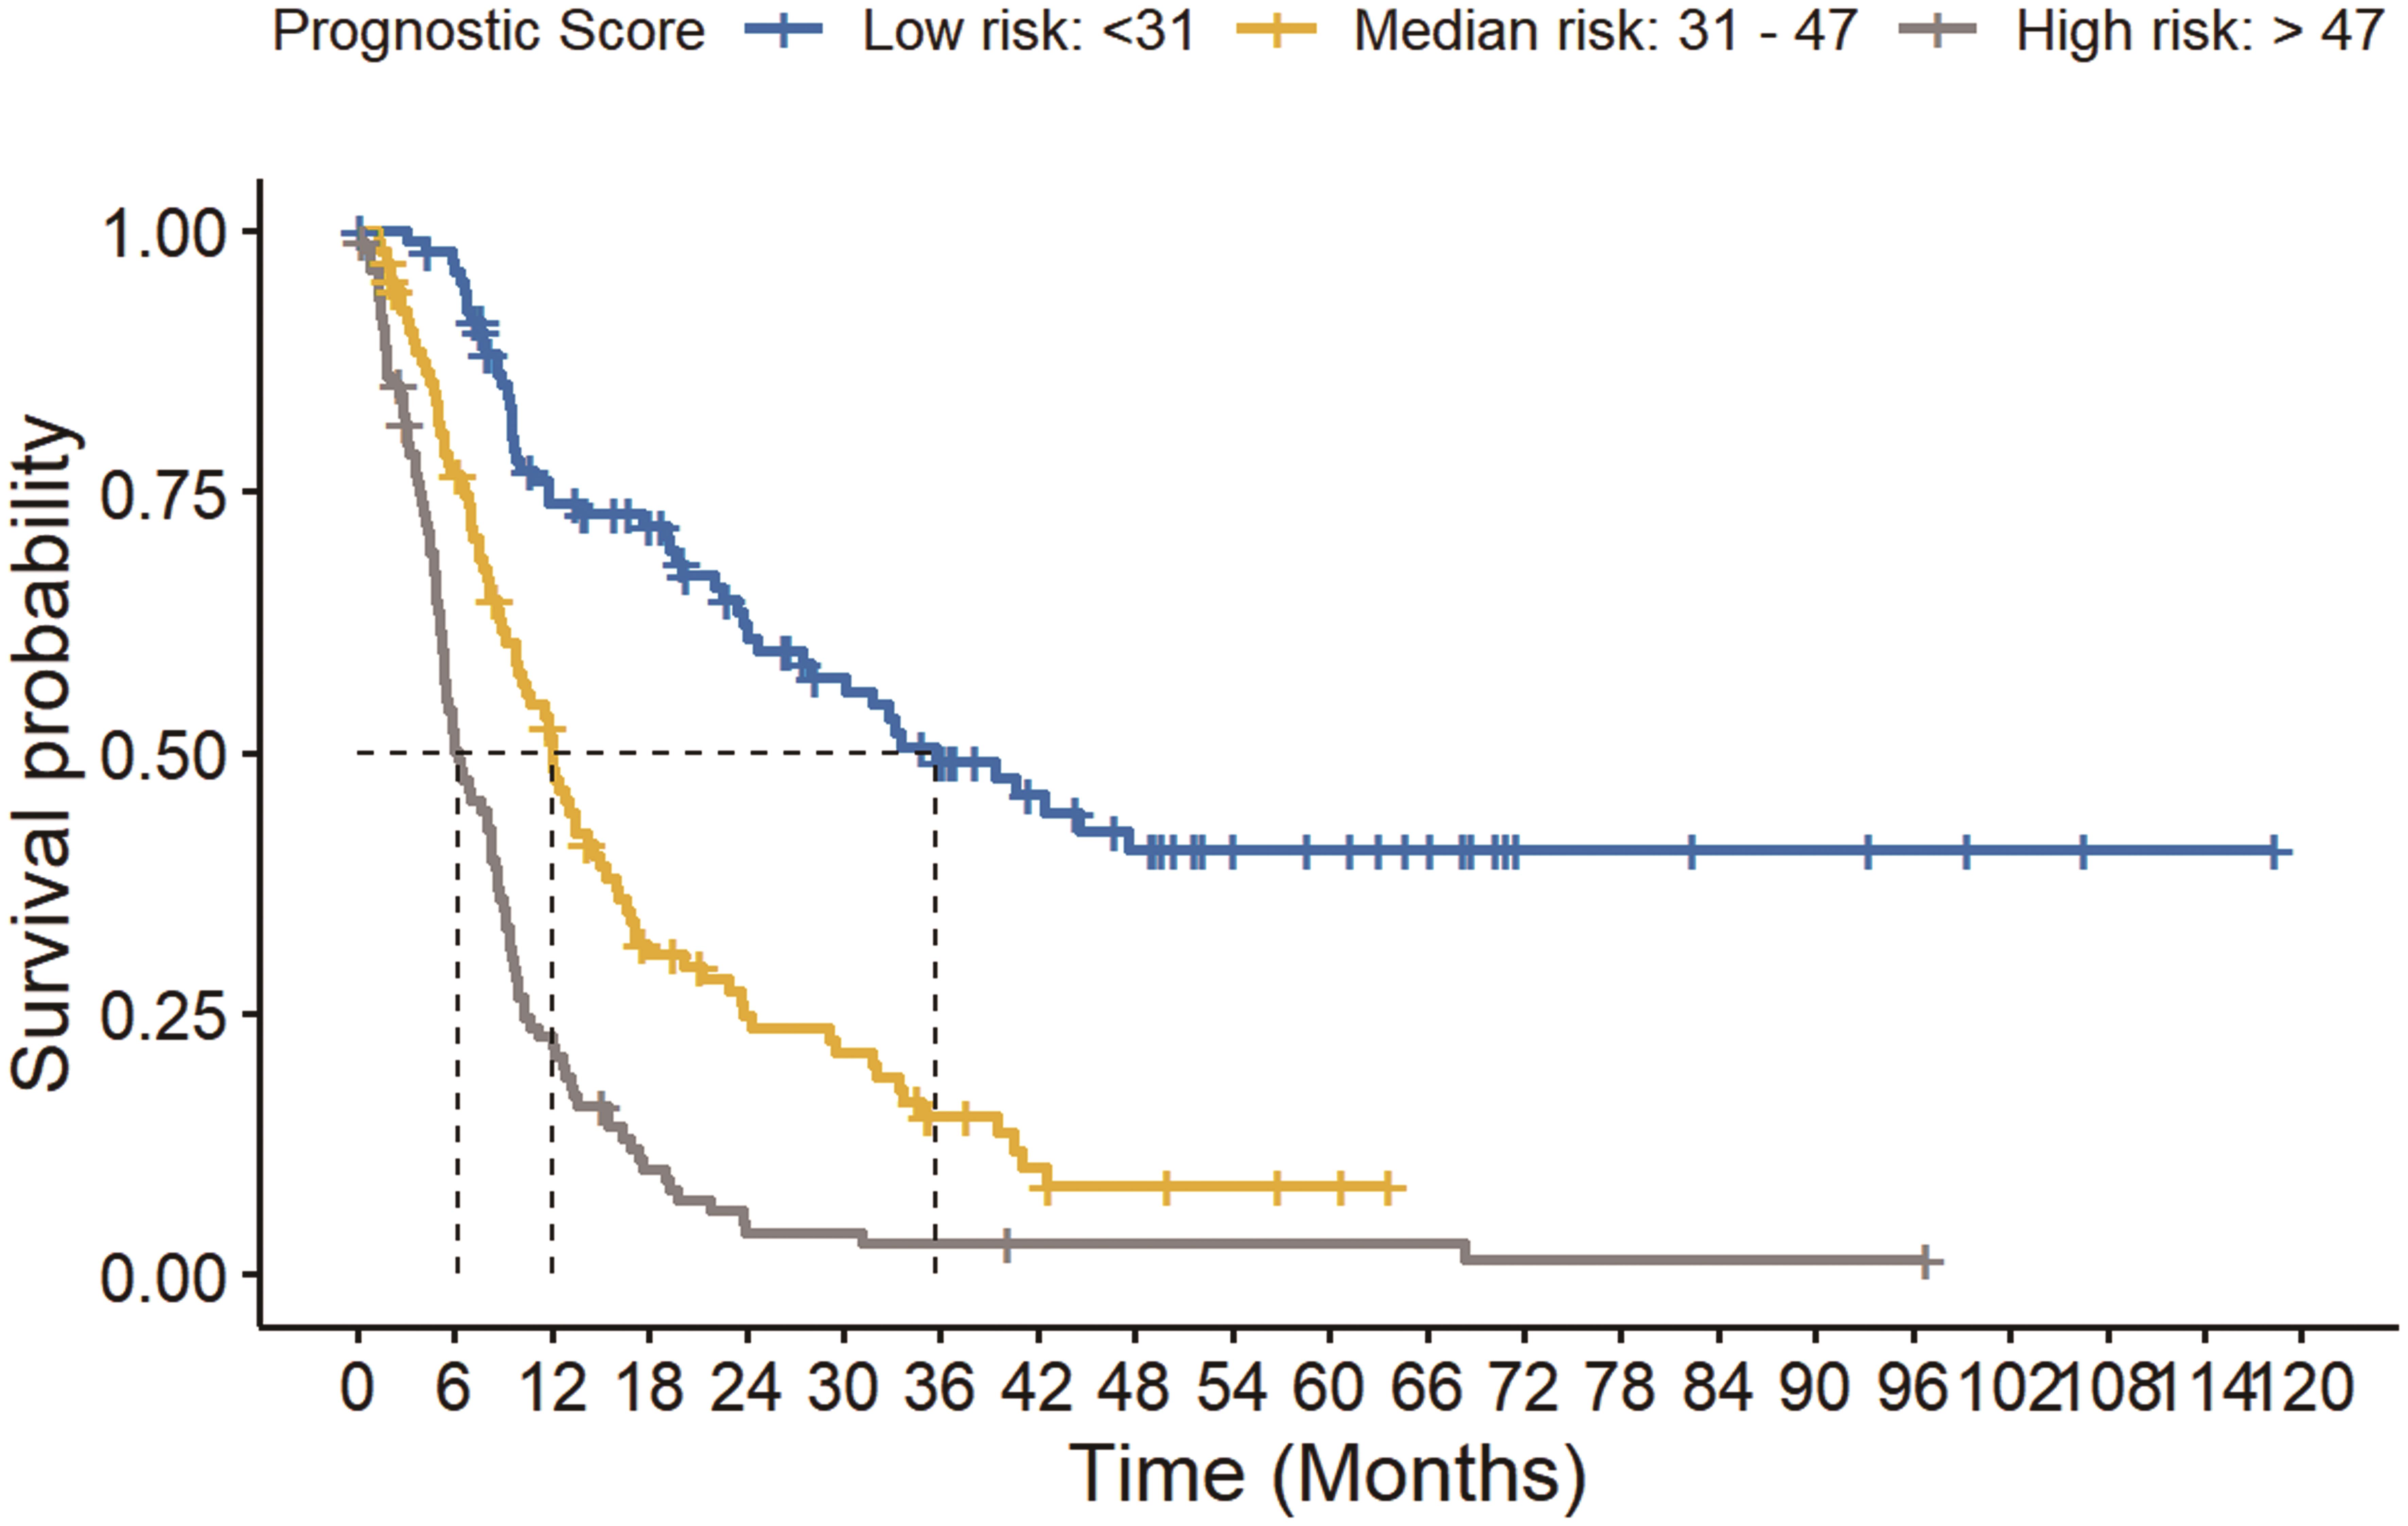 Kaplan-Meier curves demonstrating the differences in OS among low, mid and high-risk patients stratified by the prognostic score for ICC.